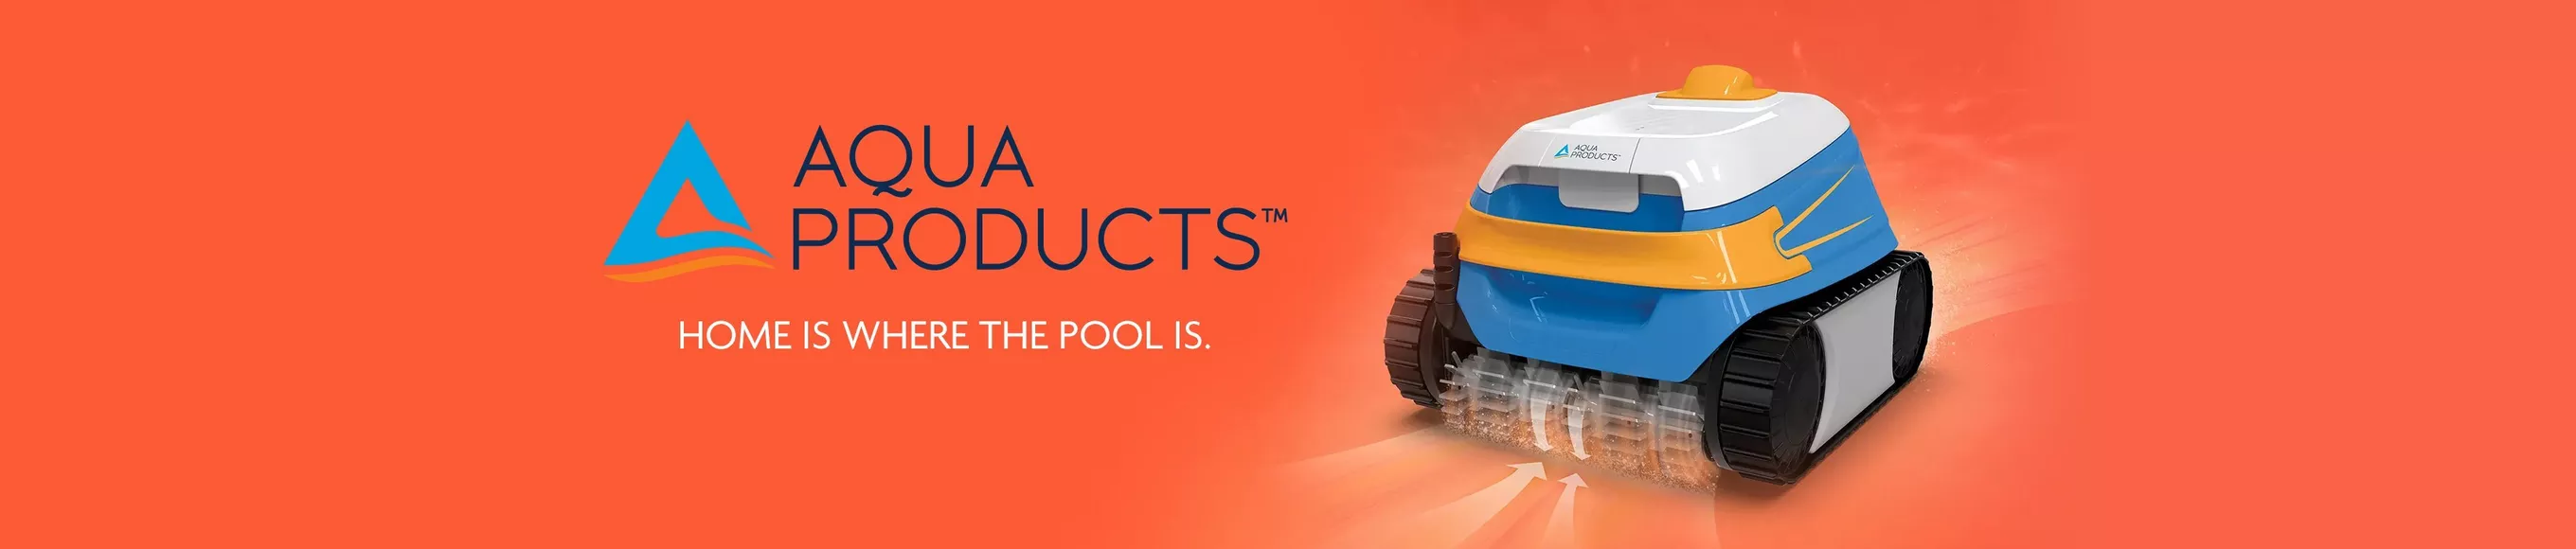 Aqua Products Featured Products